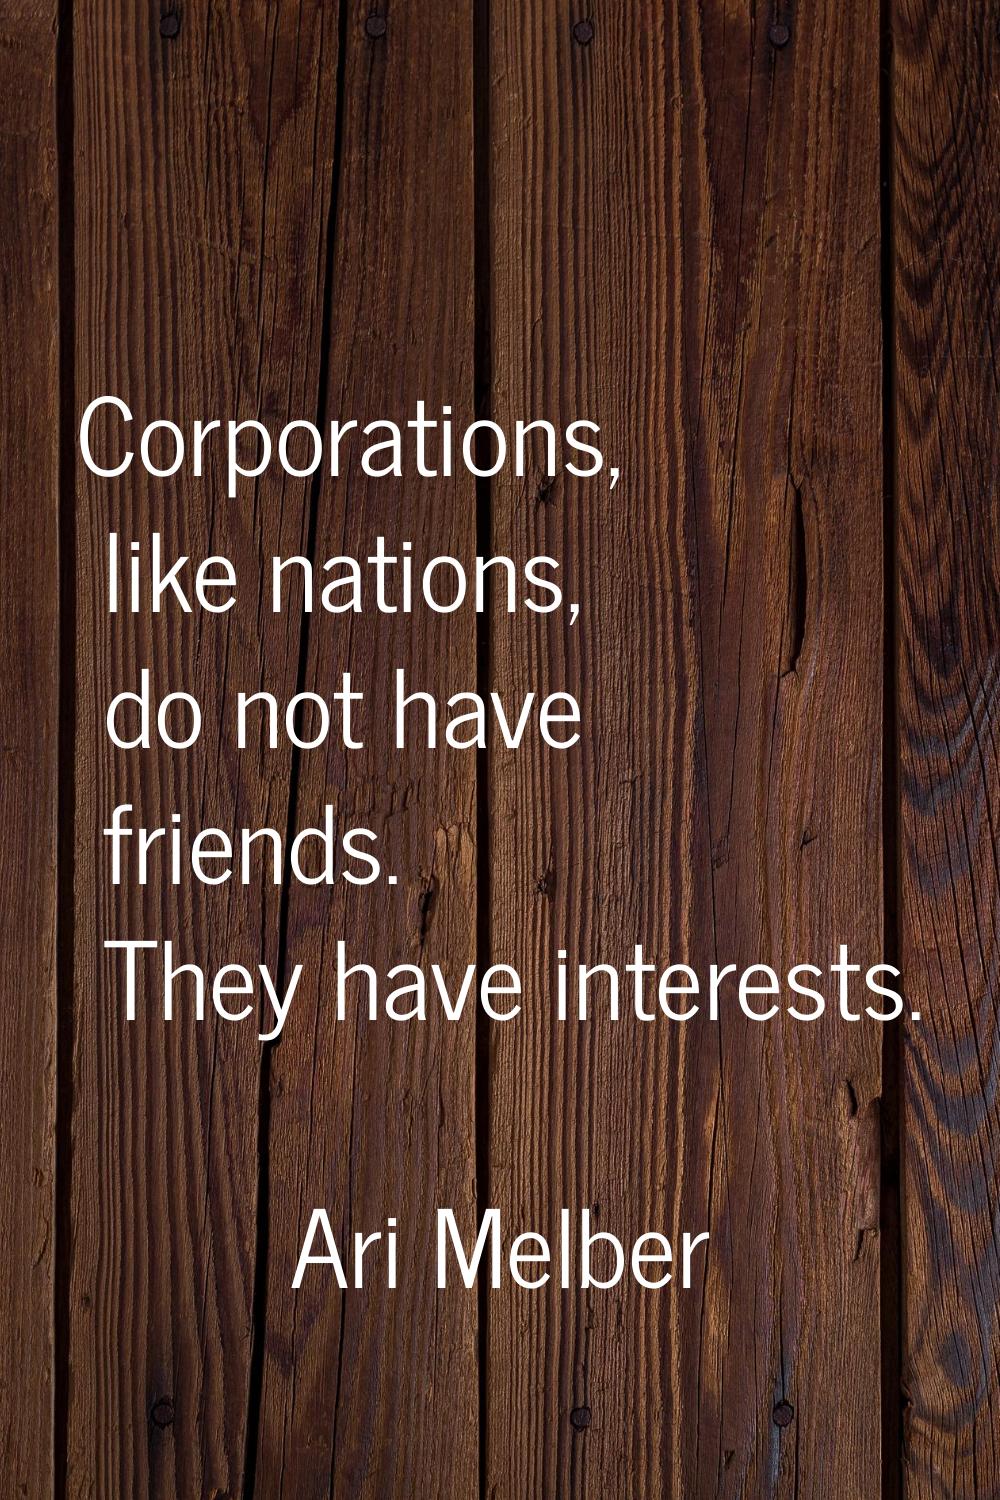 Corporations, like nations, do not have friends. They have interests.